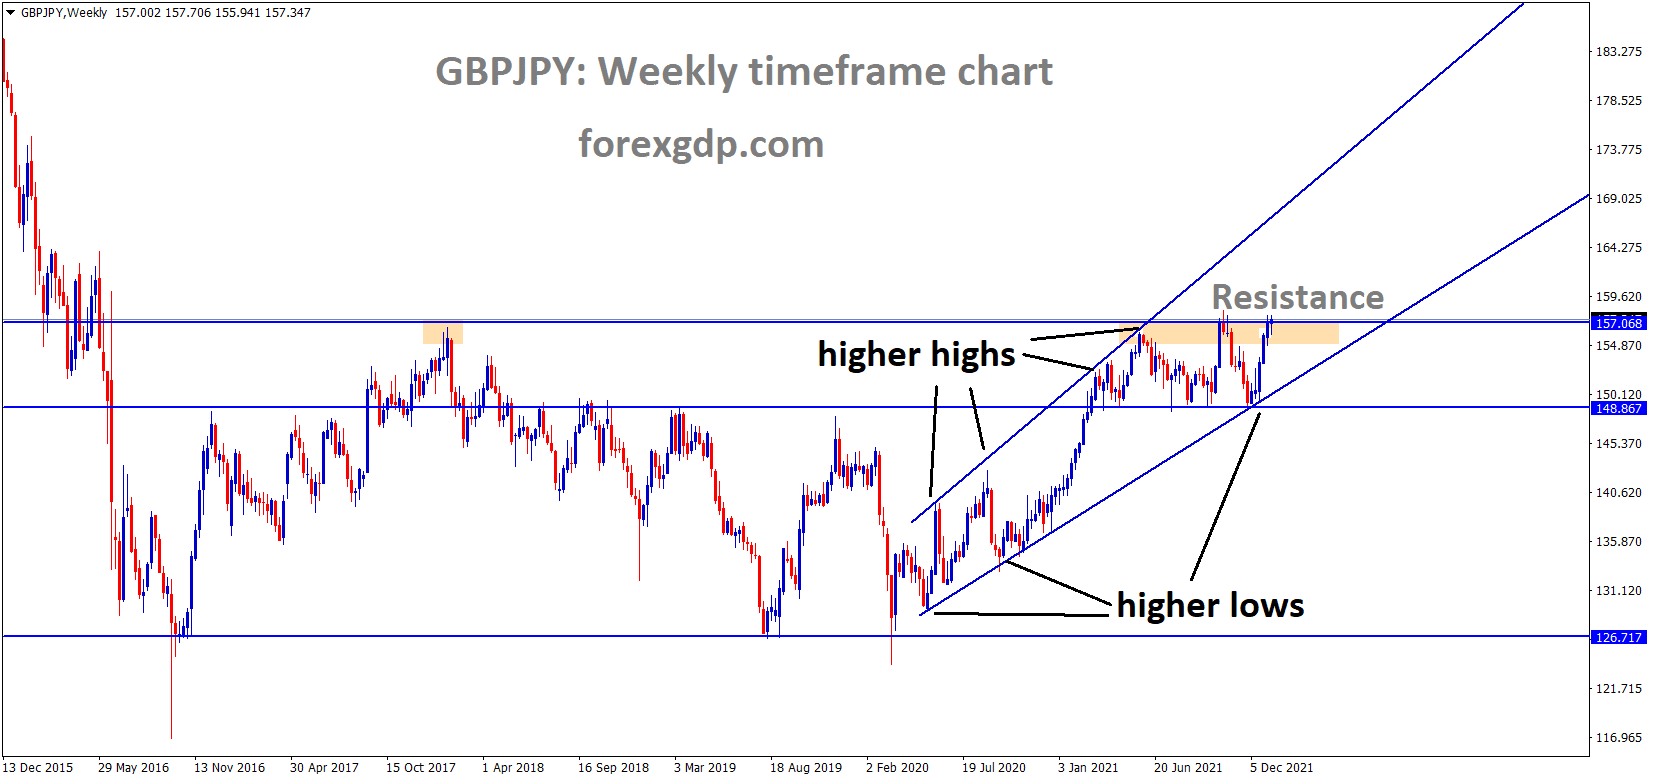 GBPJPY is moving in an Ascending channel and the market has reached the horizontal resistance area of the channel